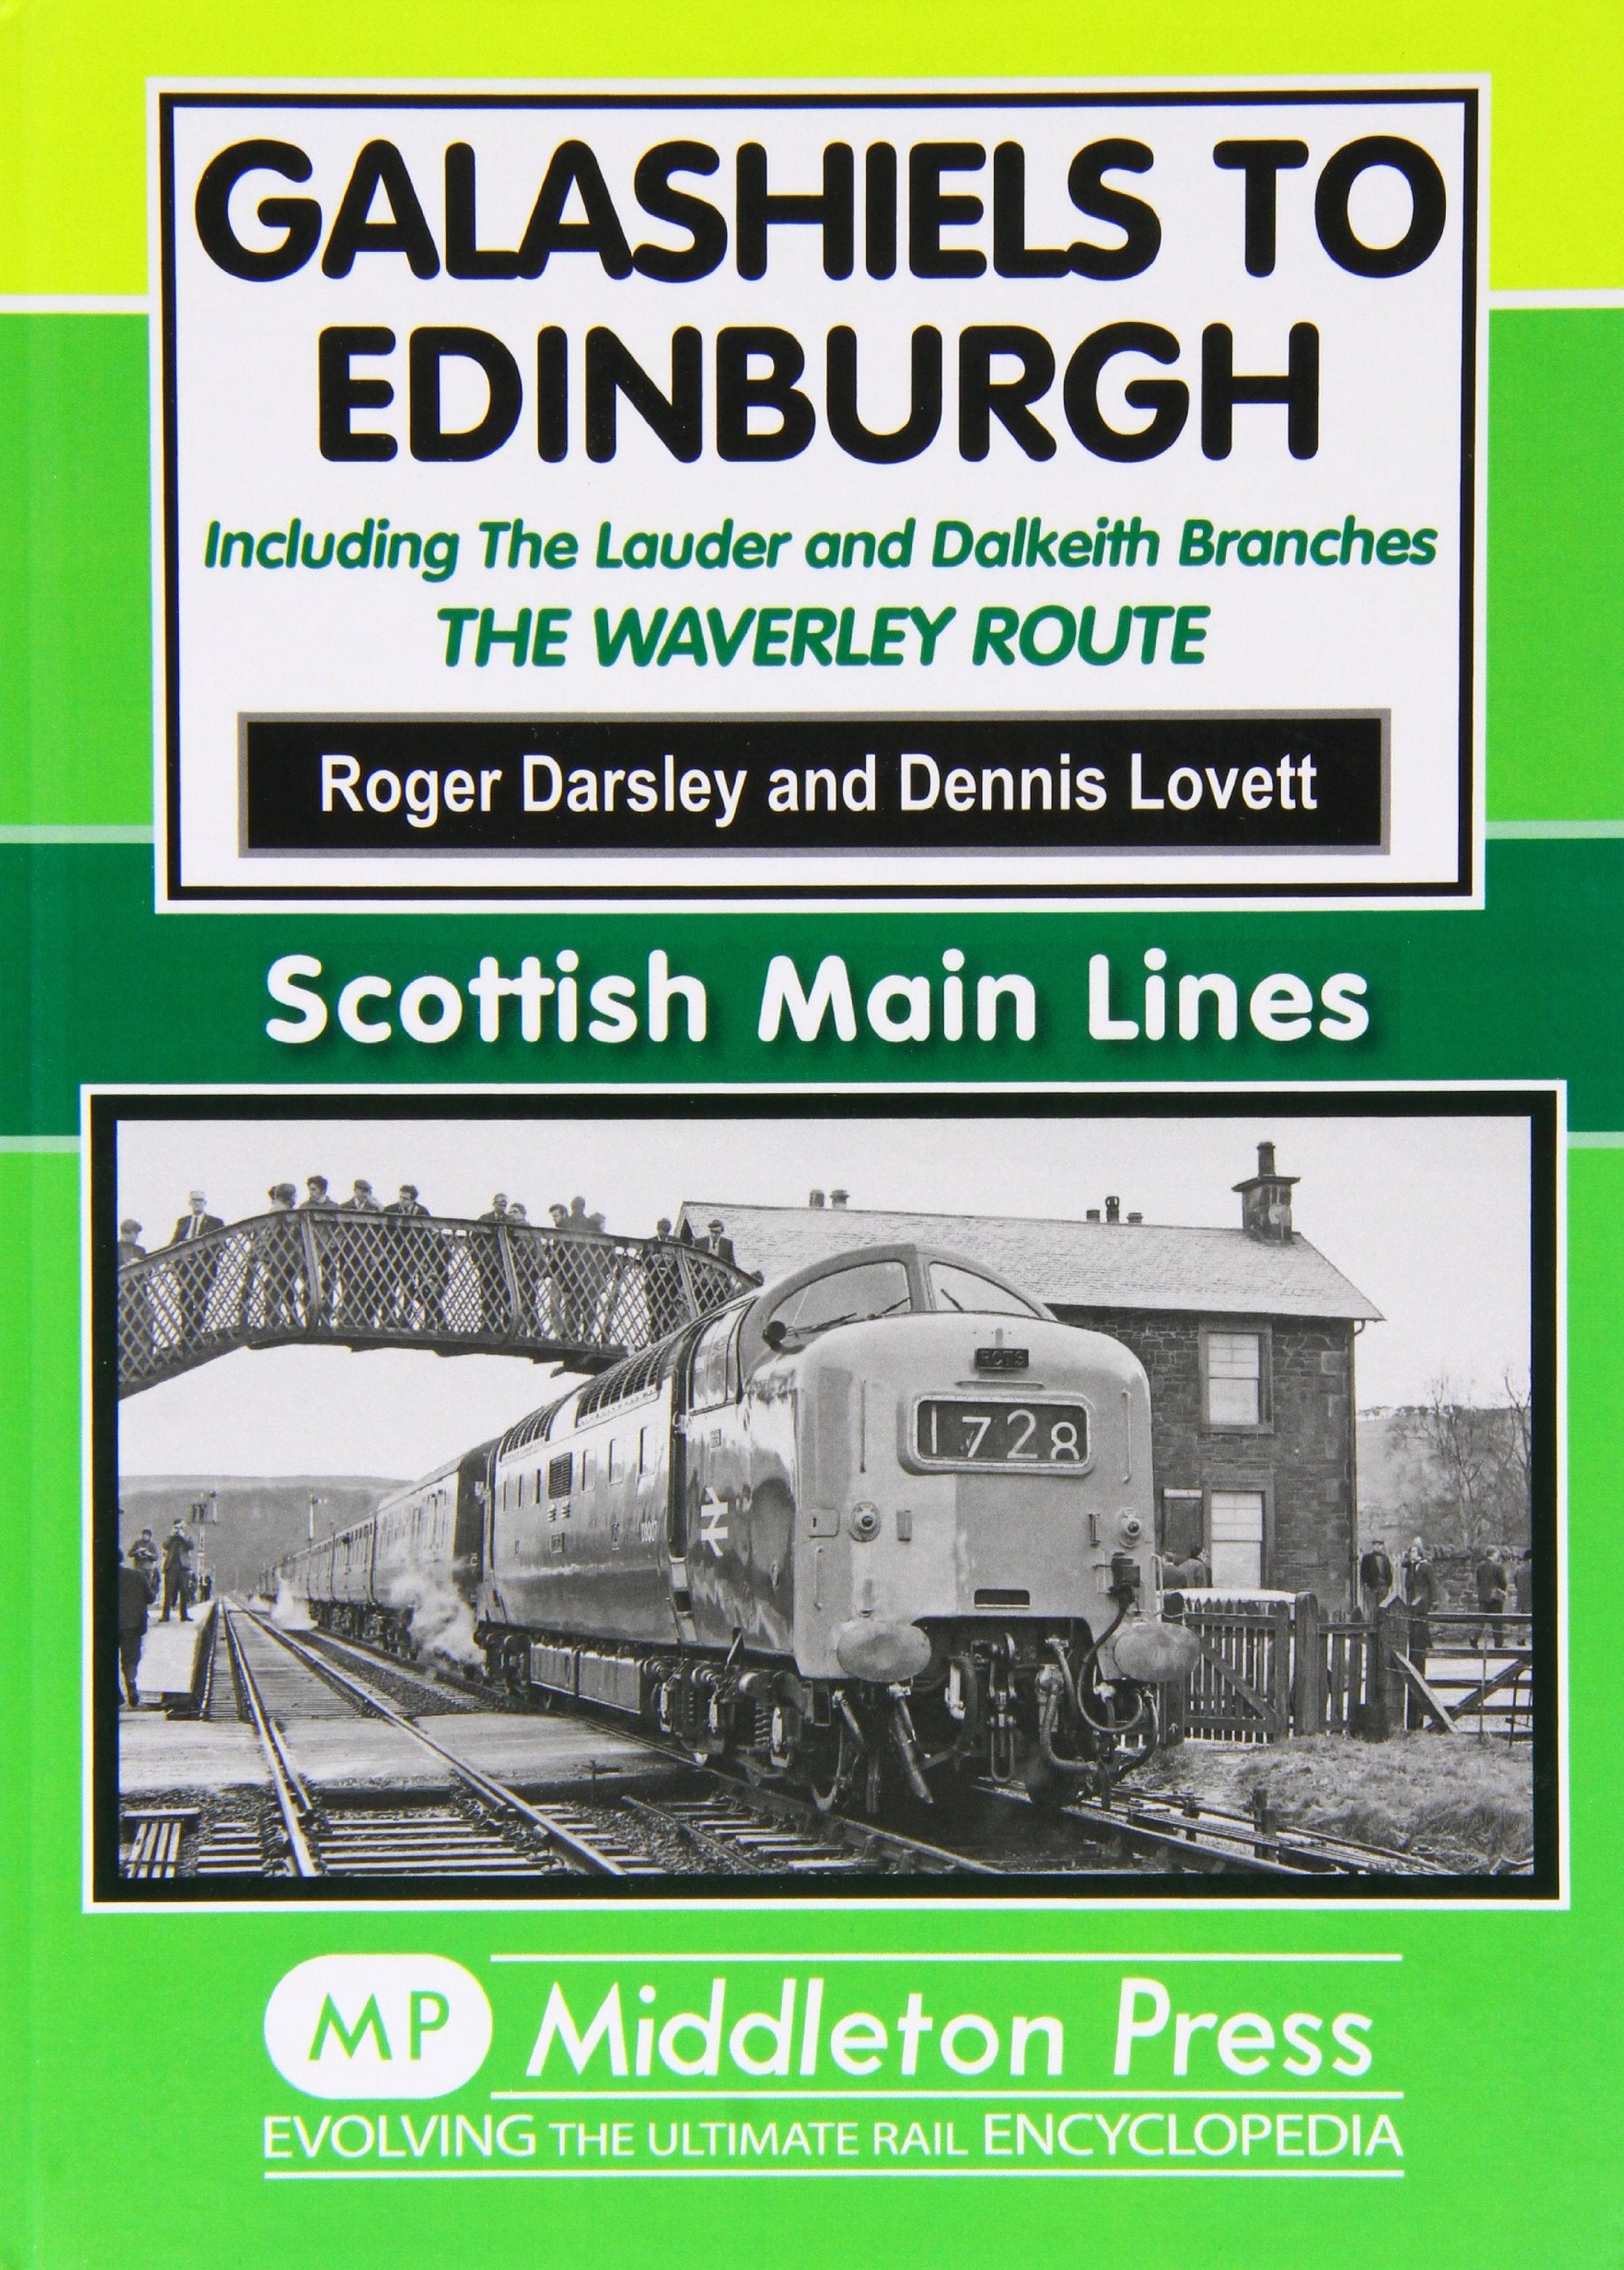 Scottish Main Lines Galashiels to Edinburgh Including the Lauder and Dalkeith Branches - The Waverley Route